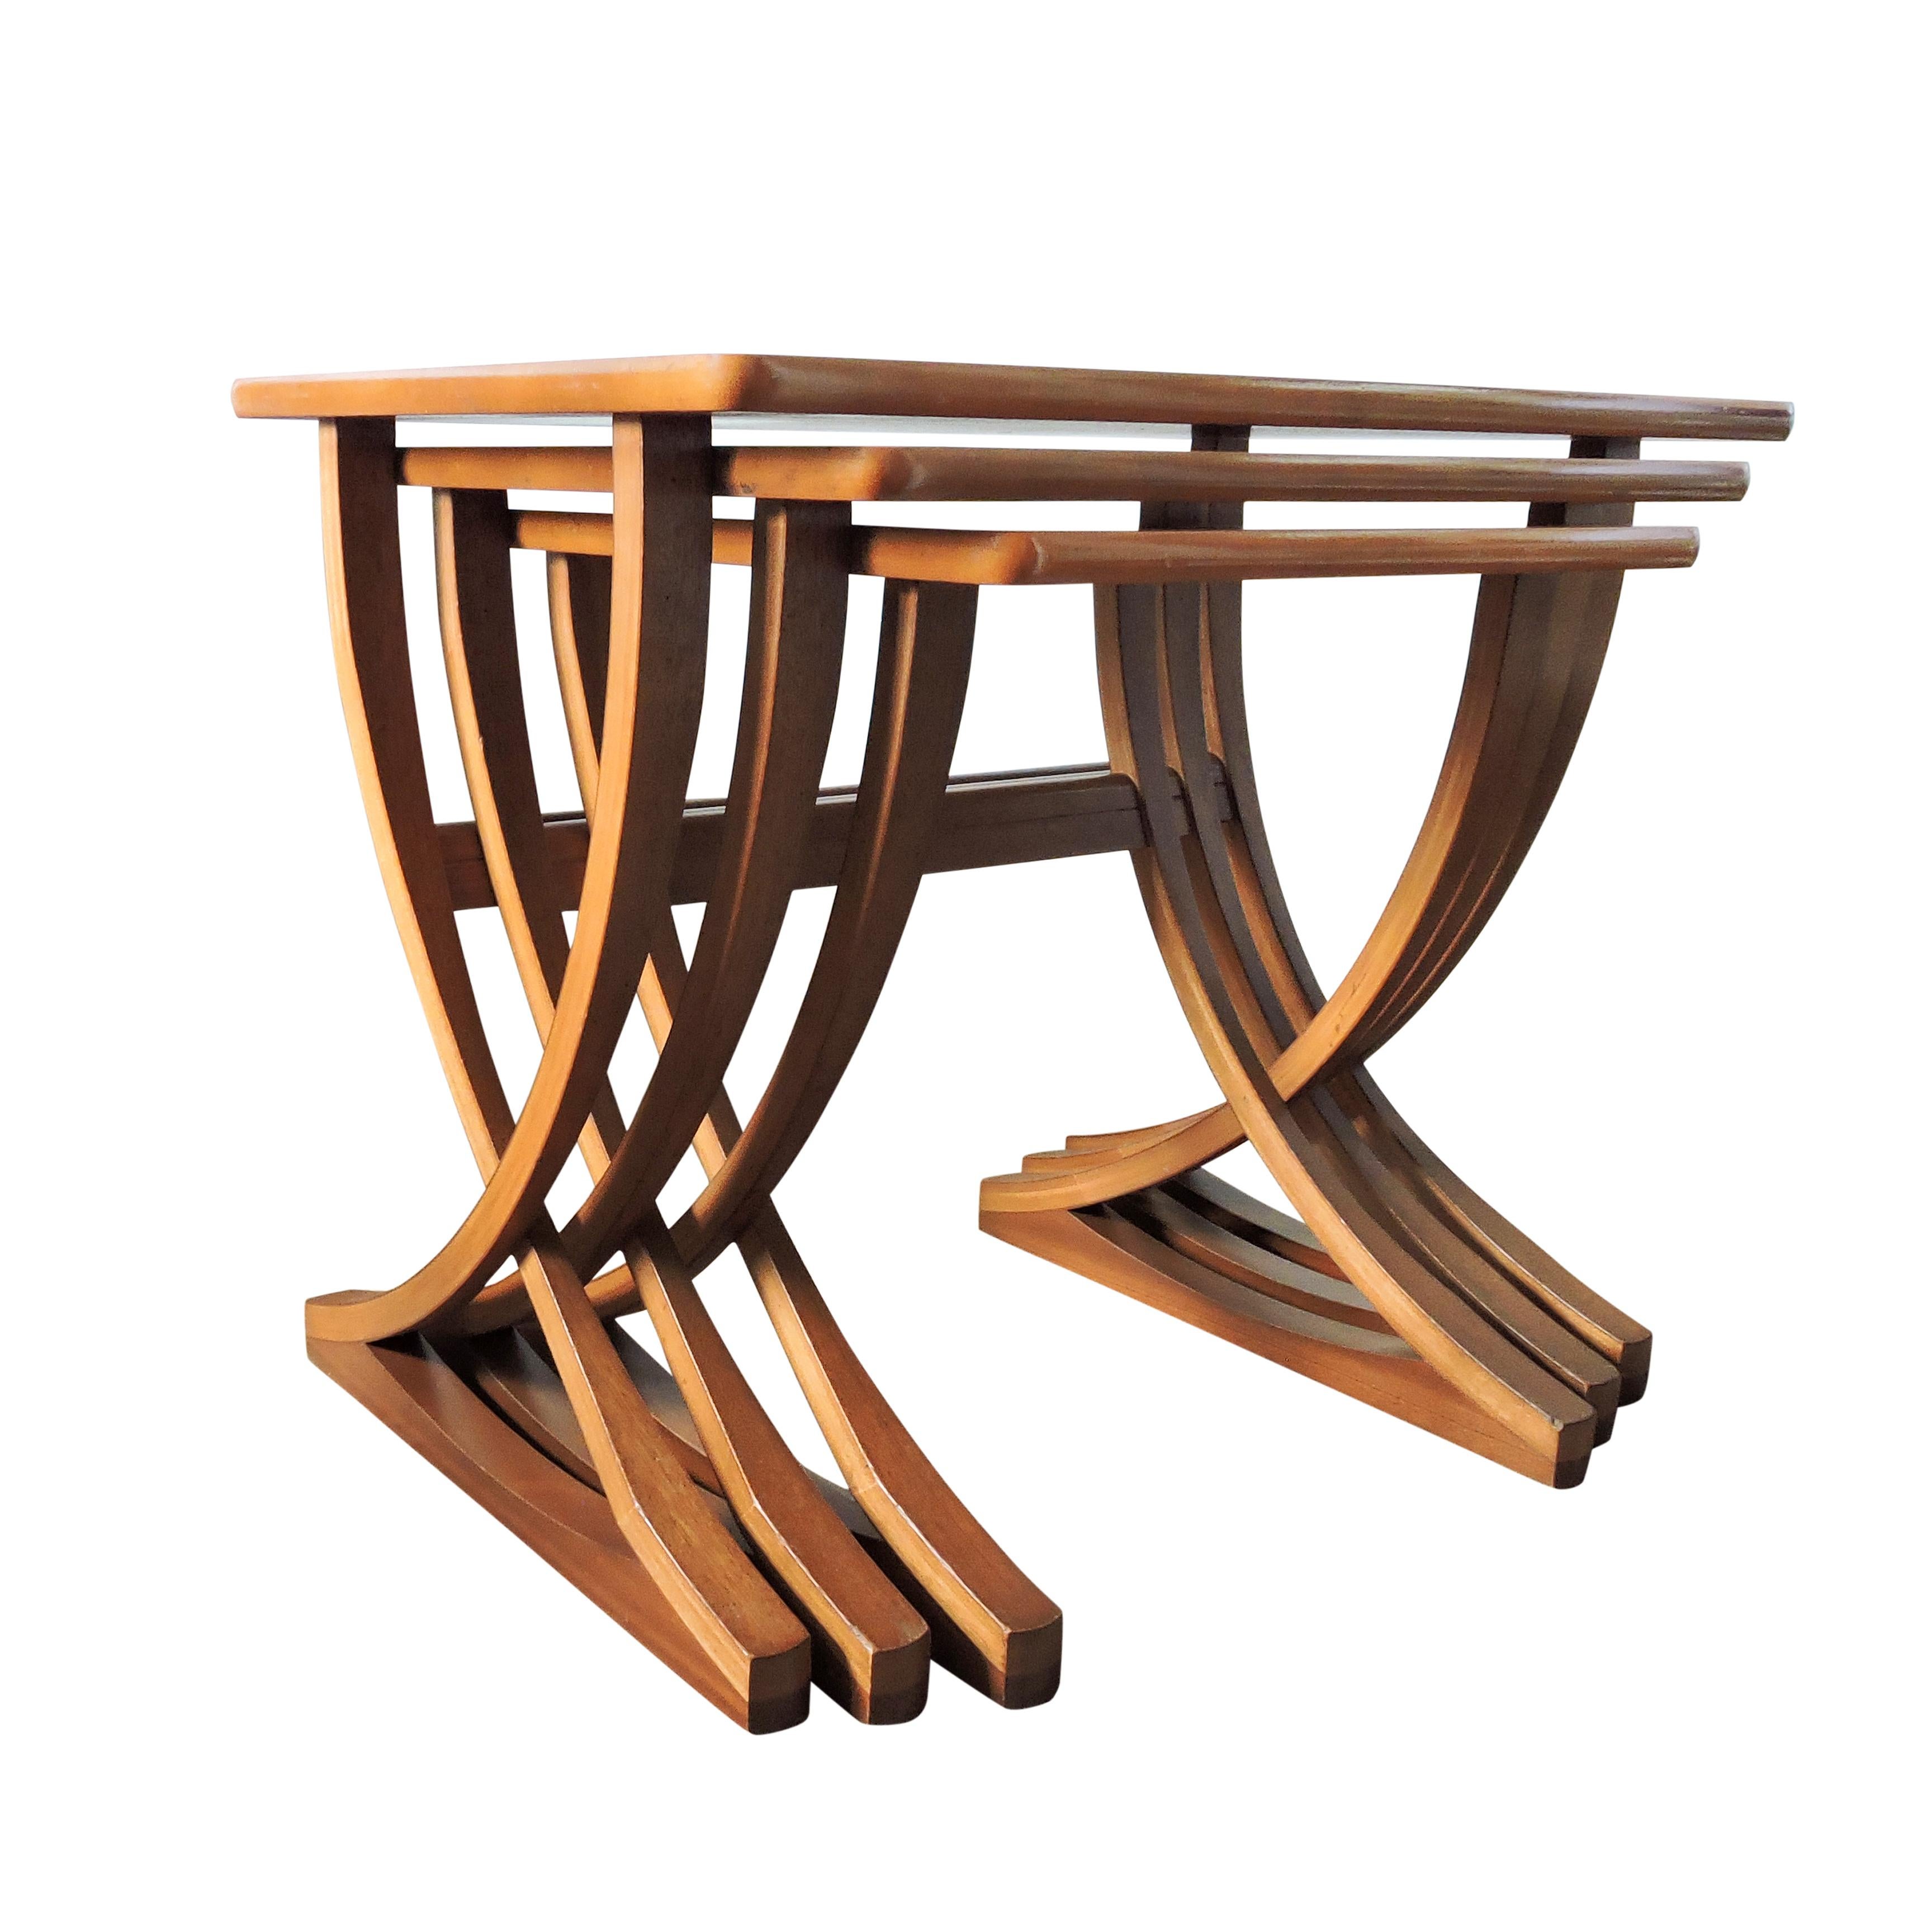 This set of 3 teak nesting tables was manufactured by Nathan.